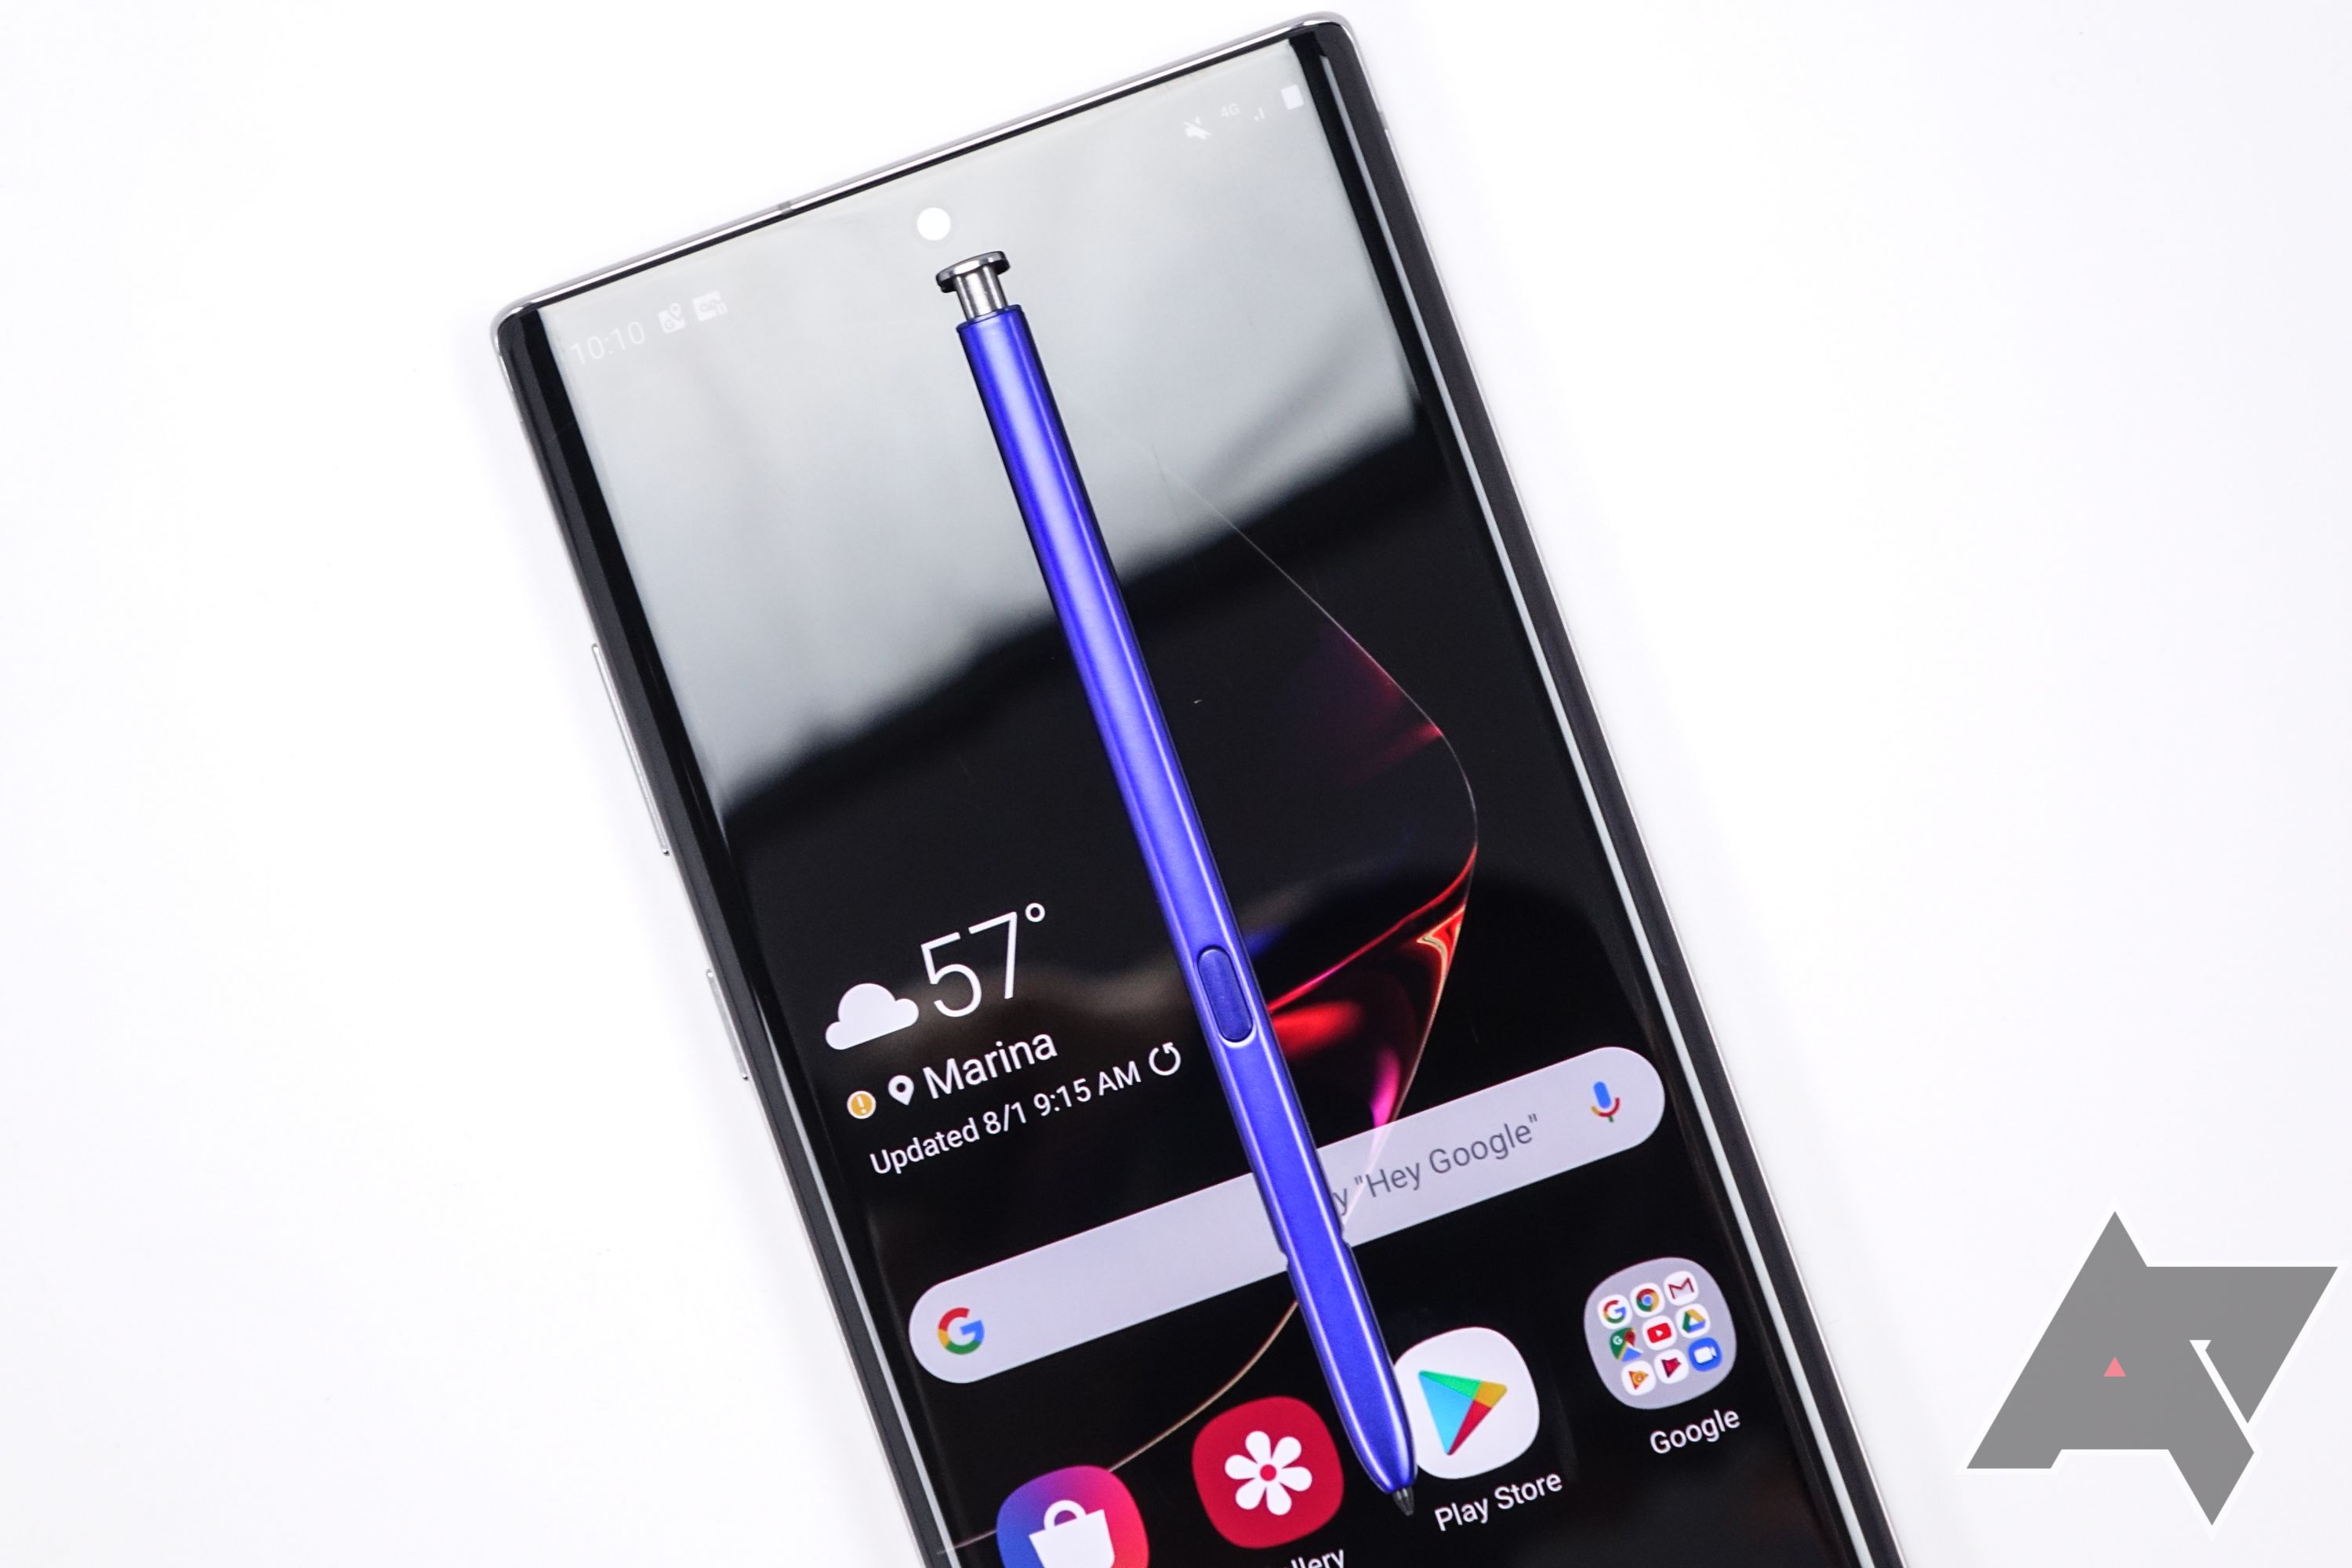 Galaxy Note 10 and 10+ are official: price, release date, and all